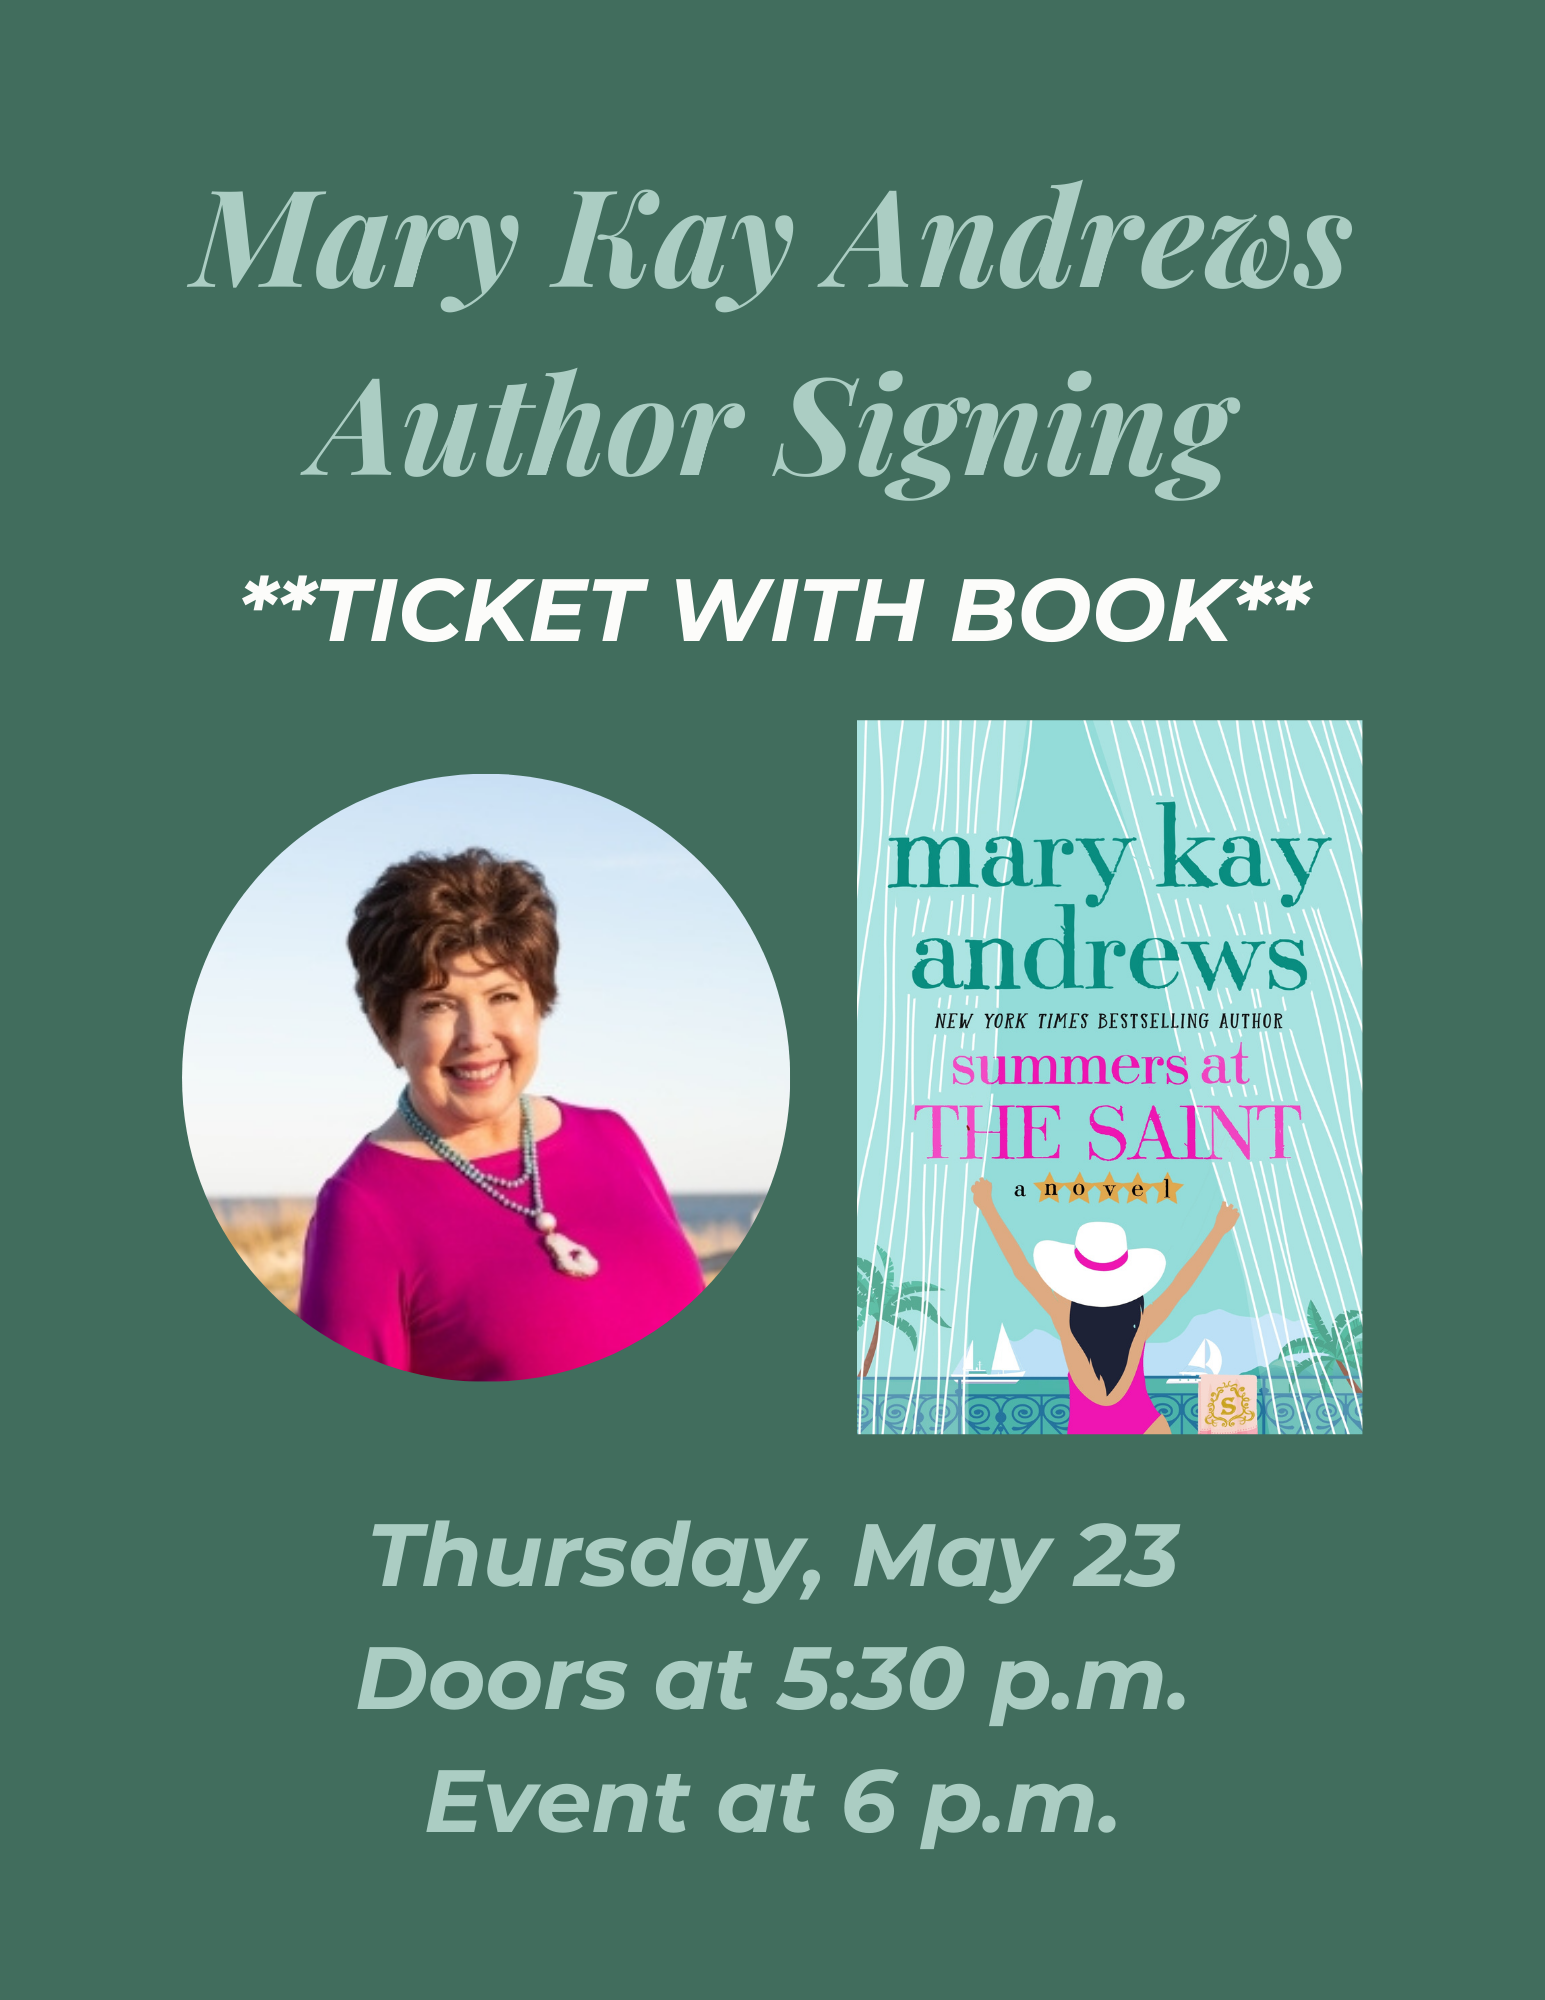 Mary Kay Andrews Author Signing: Ticket with Book